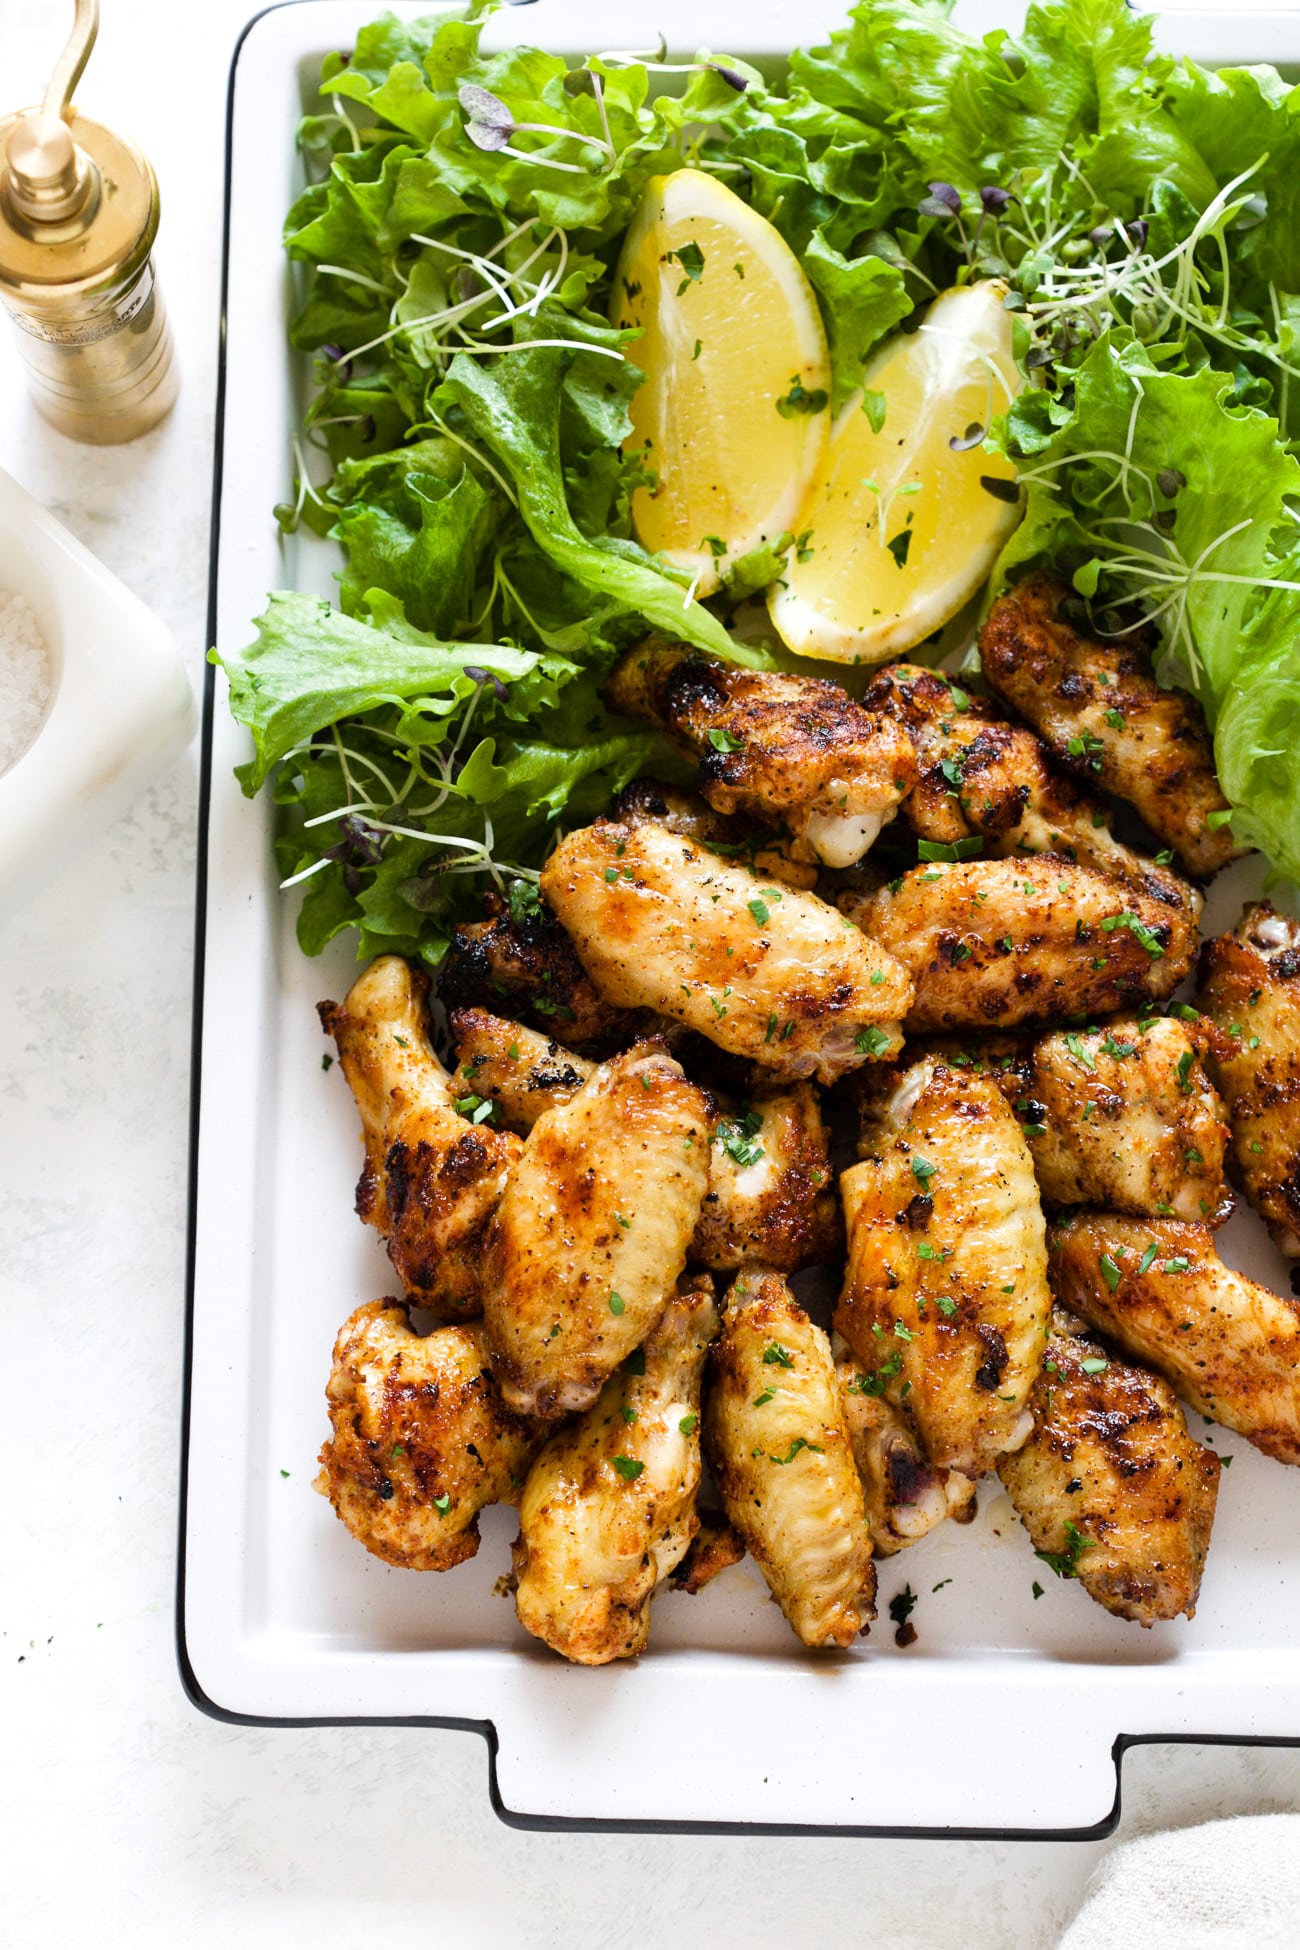 grilled chicken wings on a white platter next to greens and lemon slices